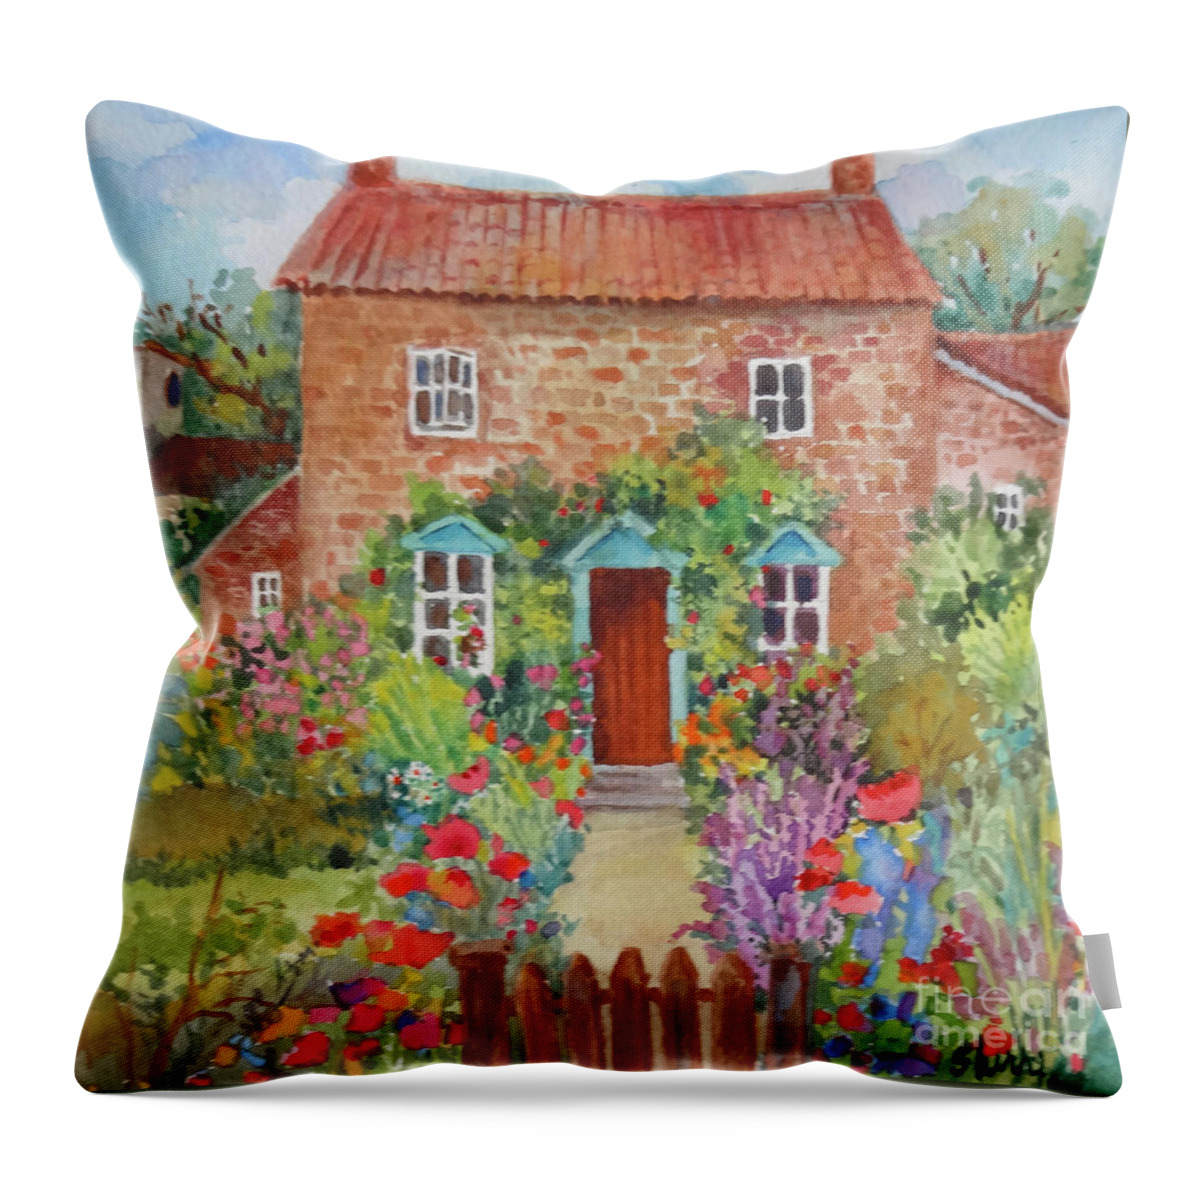  English Cottage Throw Pillow featuring the painting English Cottage #2 by Sherri Crabtree